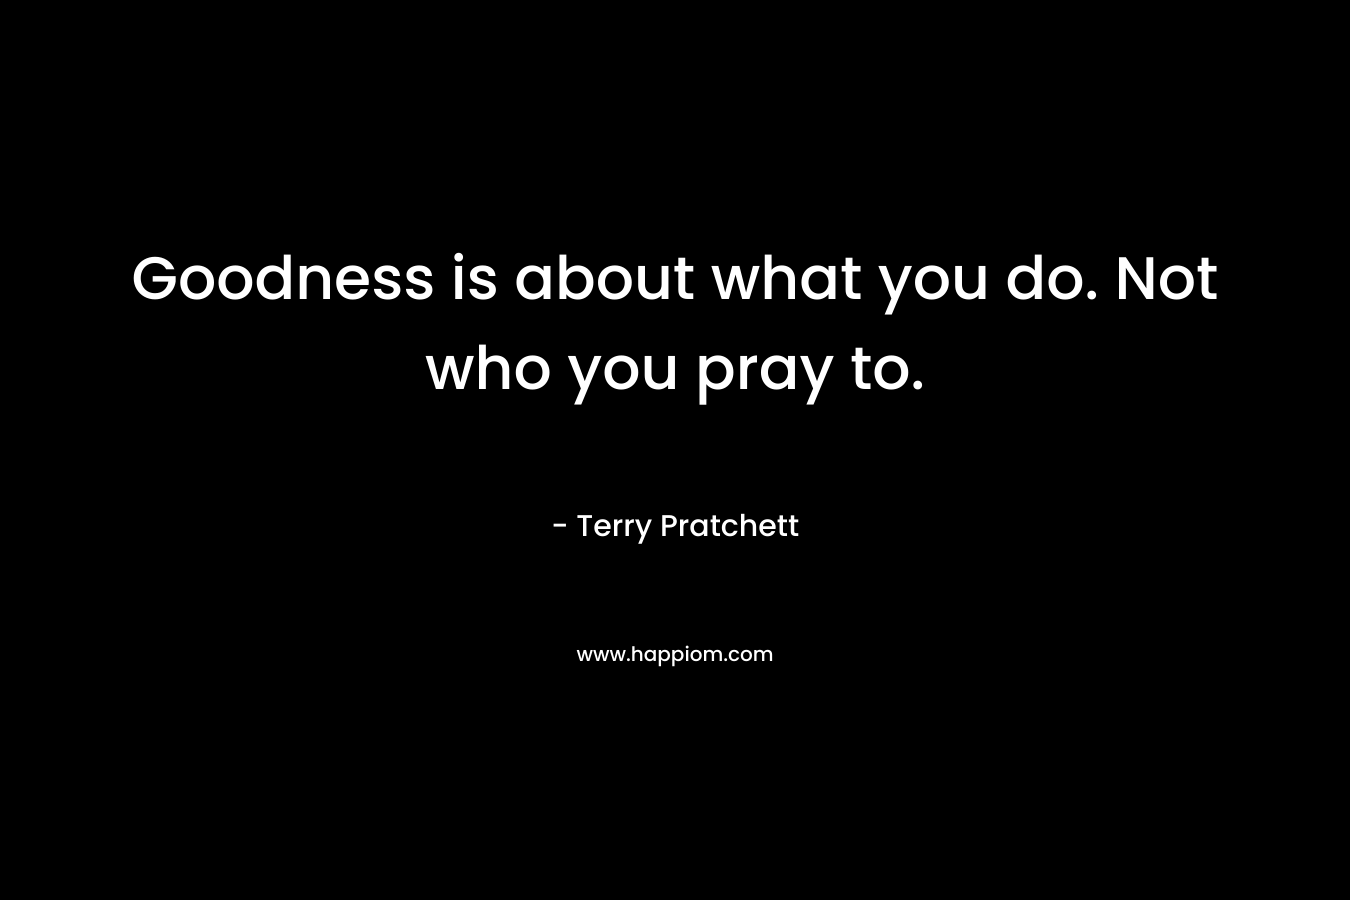 Goodness is about what you do. Not who you pray to.